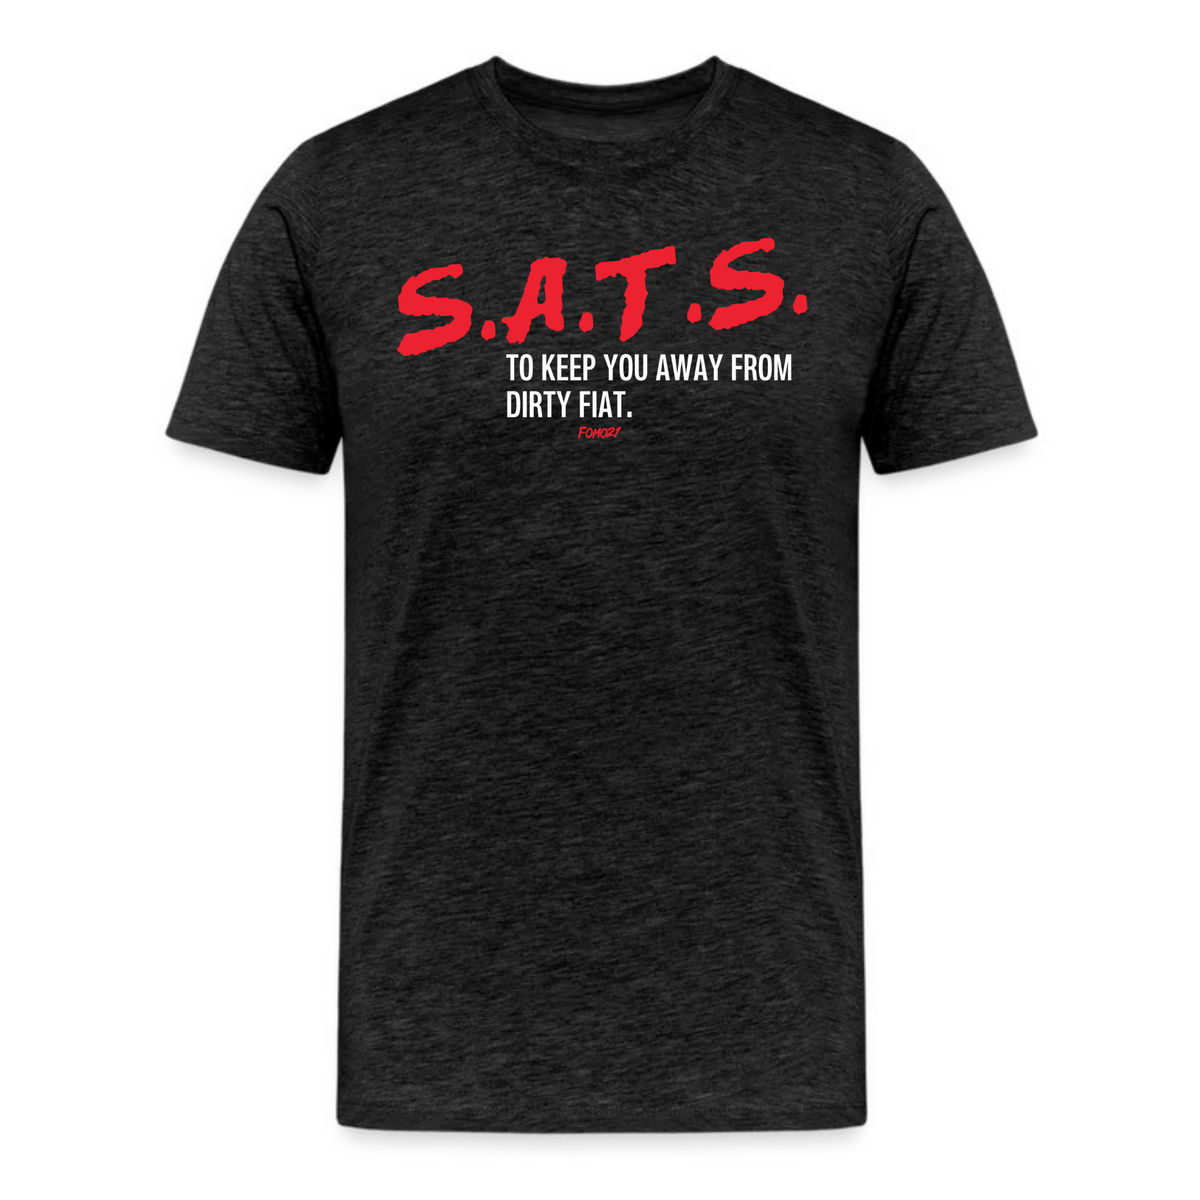 SATS To Keep You Away From Dirty Fiat Bitcoin T-Shirt - fomo21